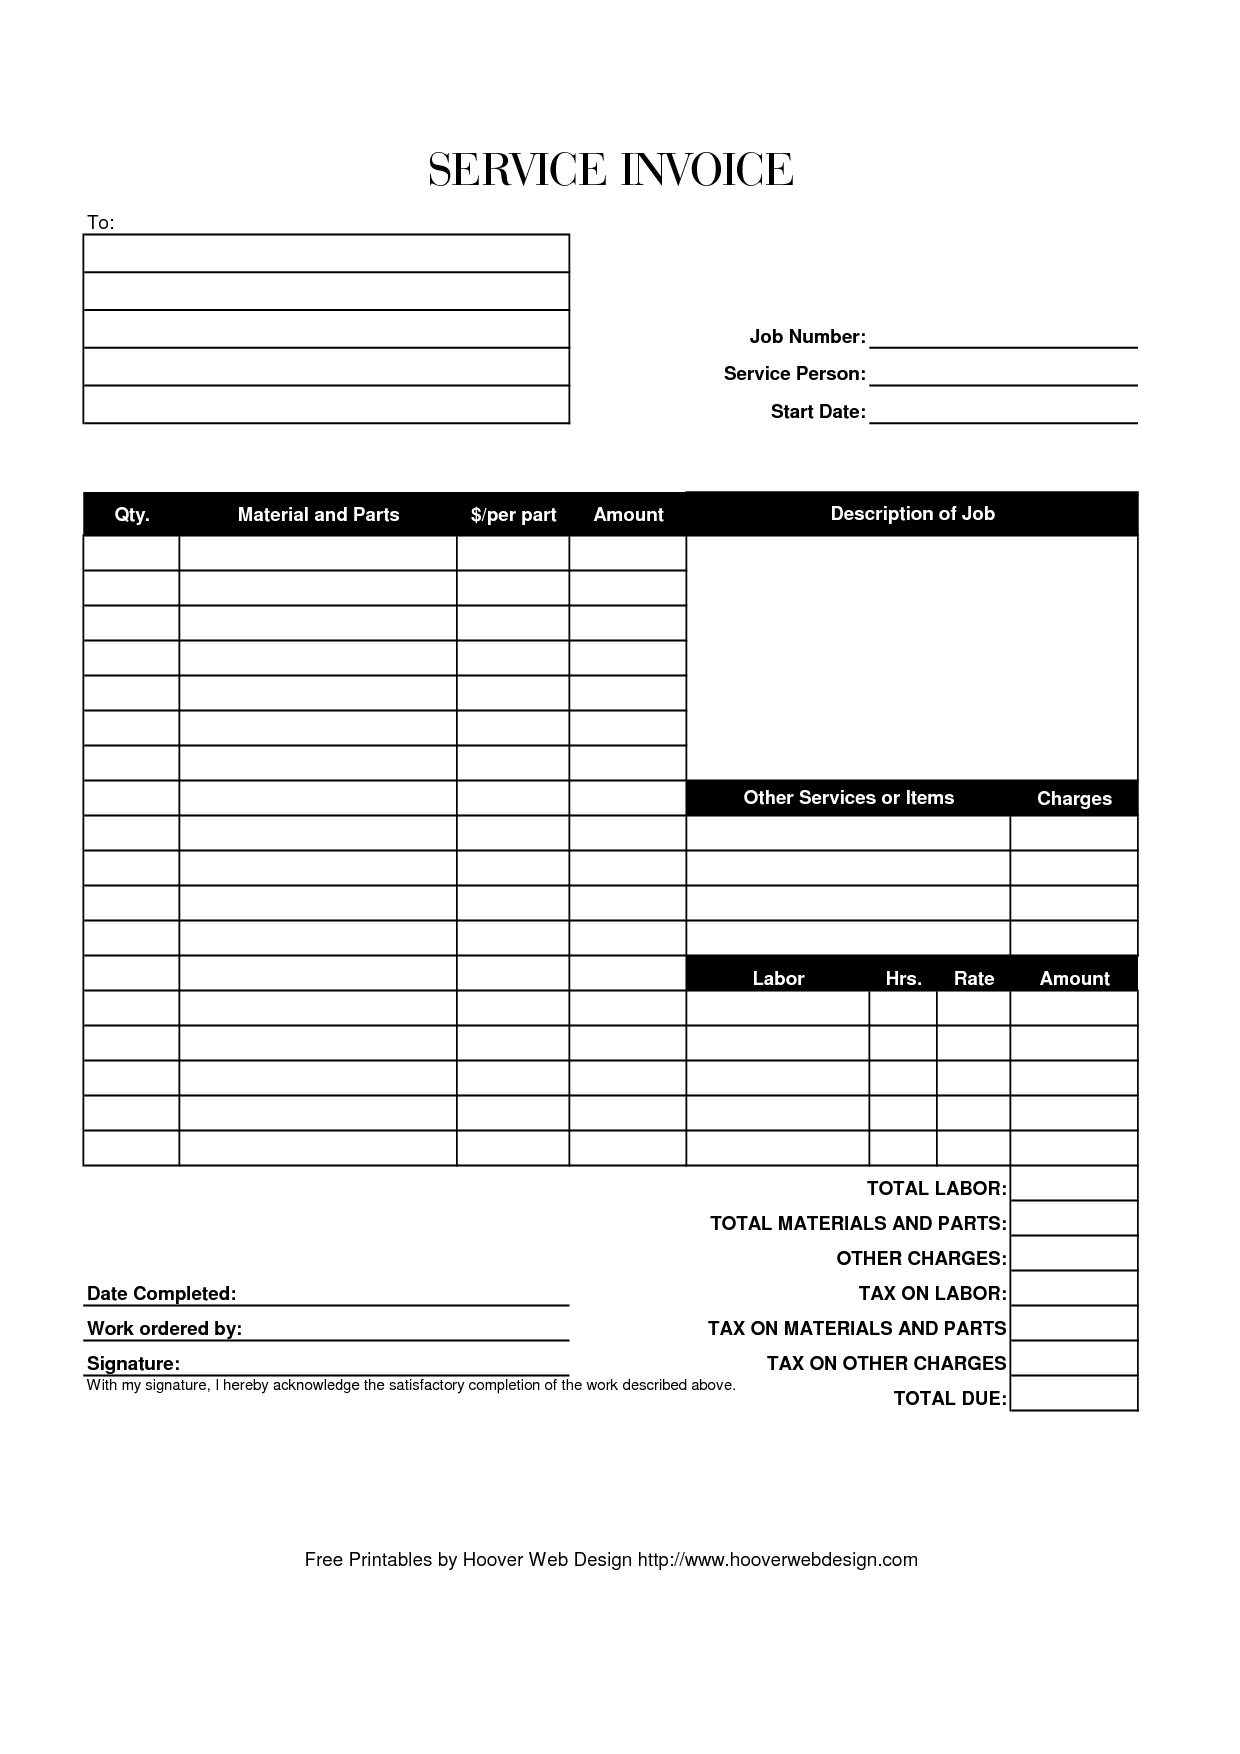 hoover receipts free printable service invoice template pdf printable invoice form